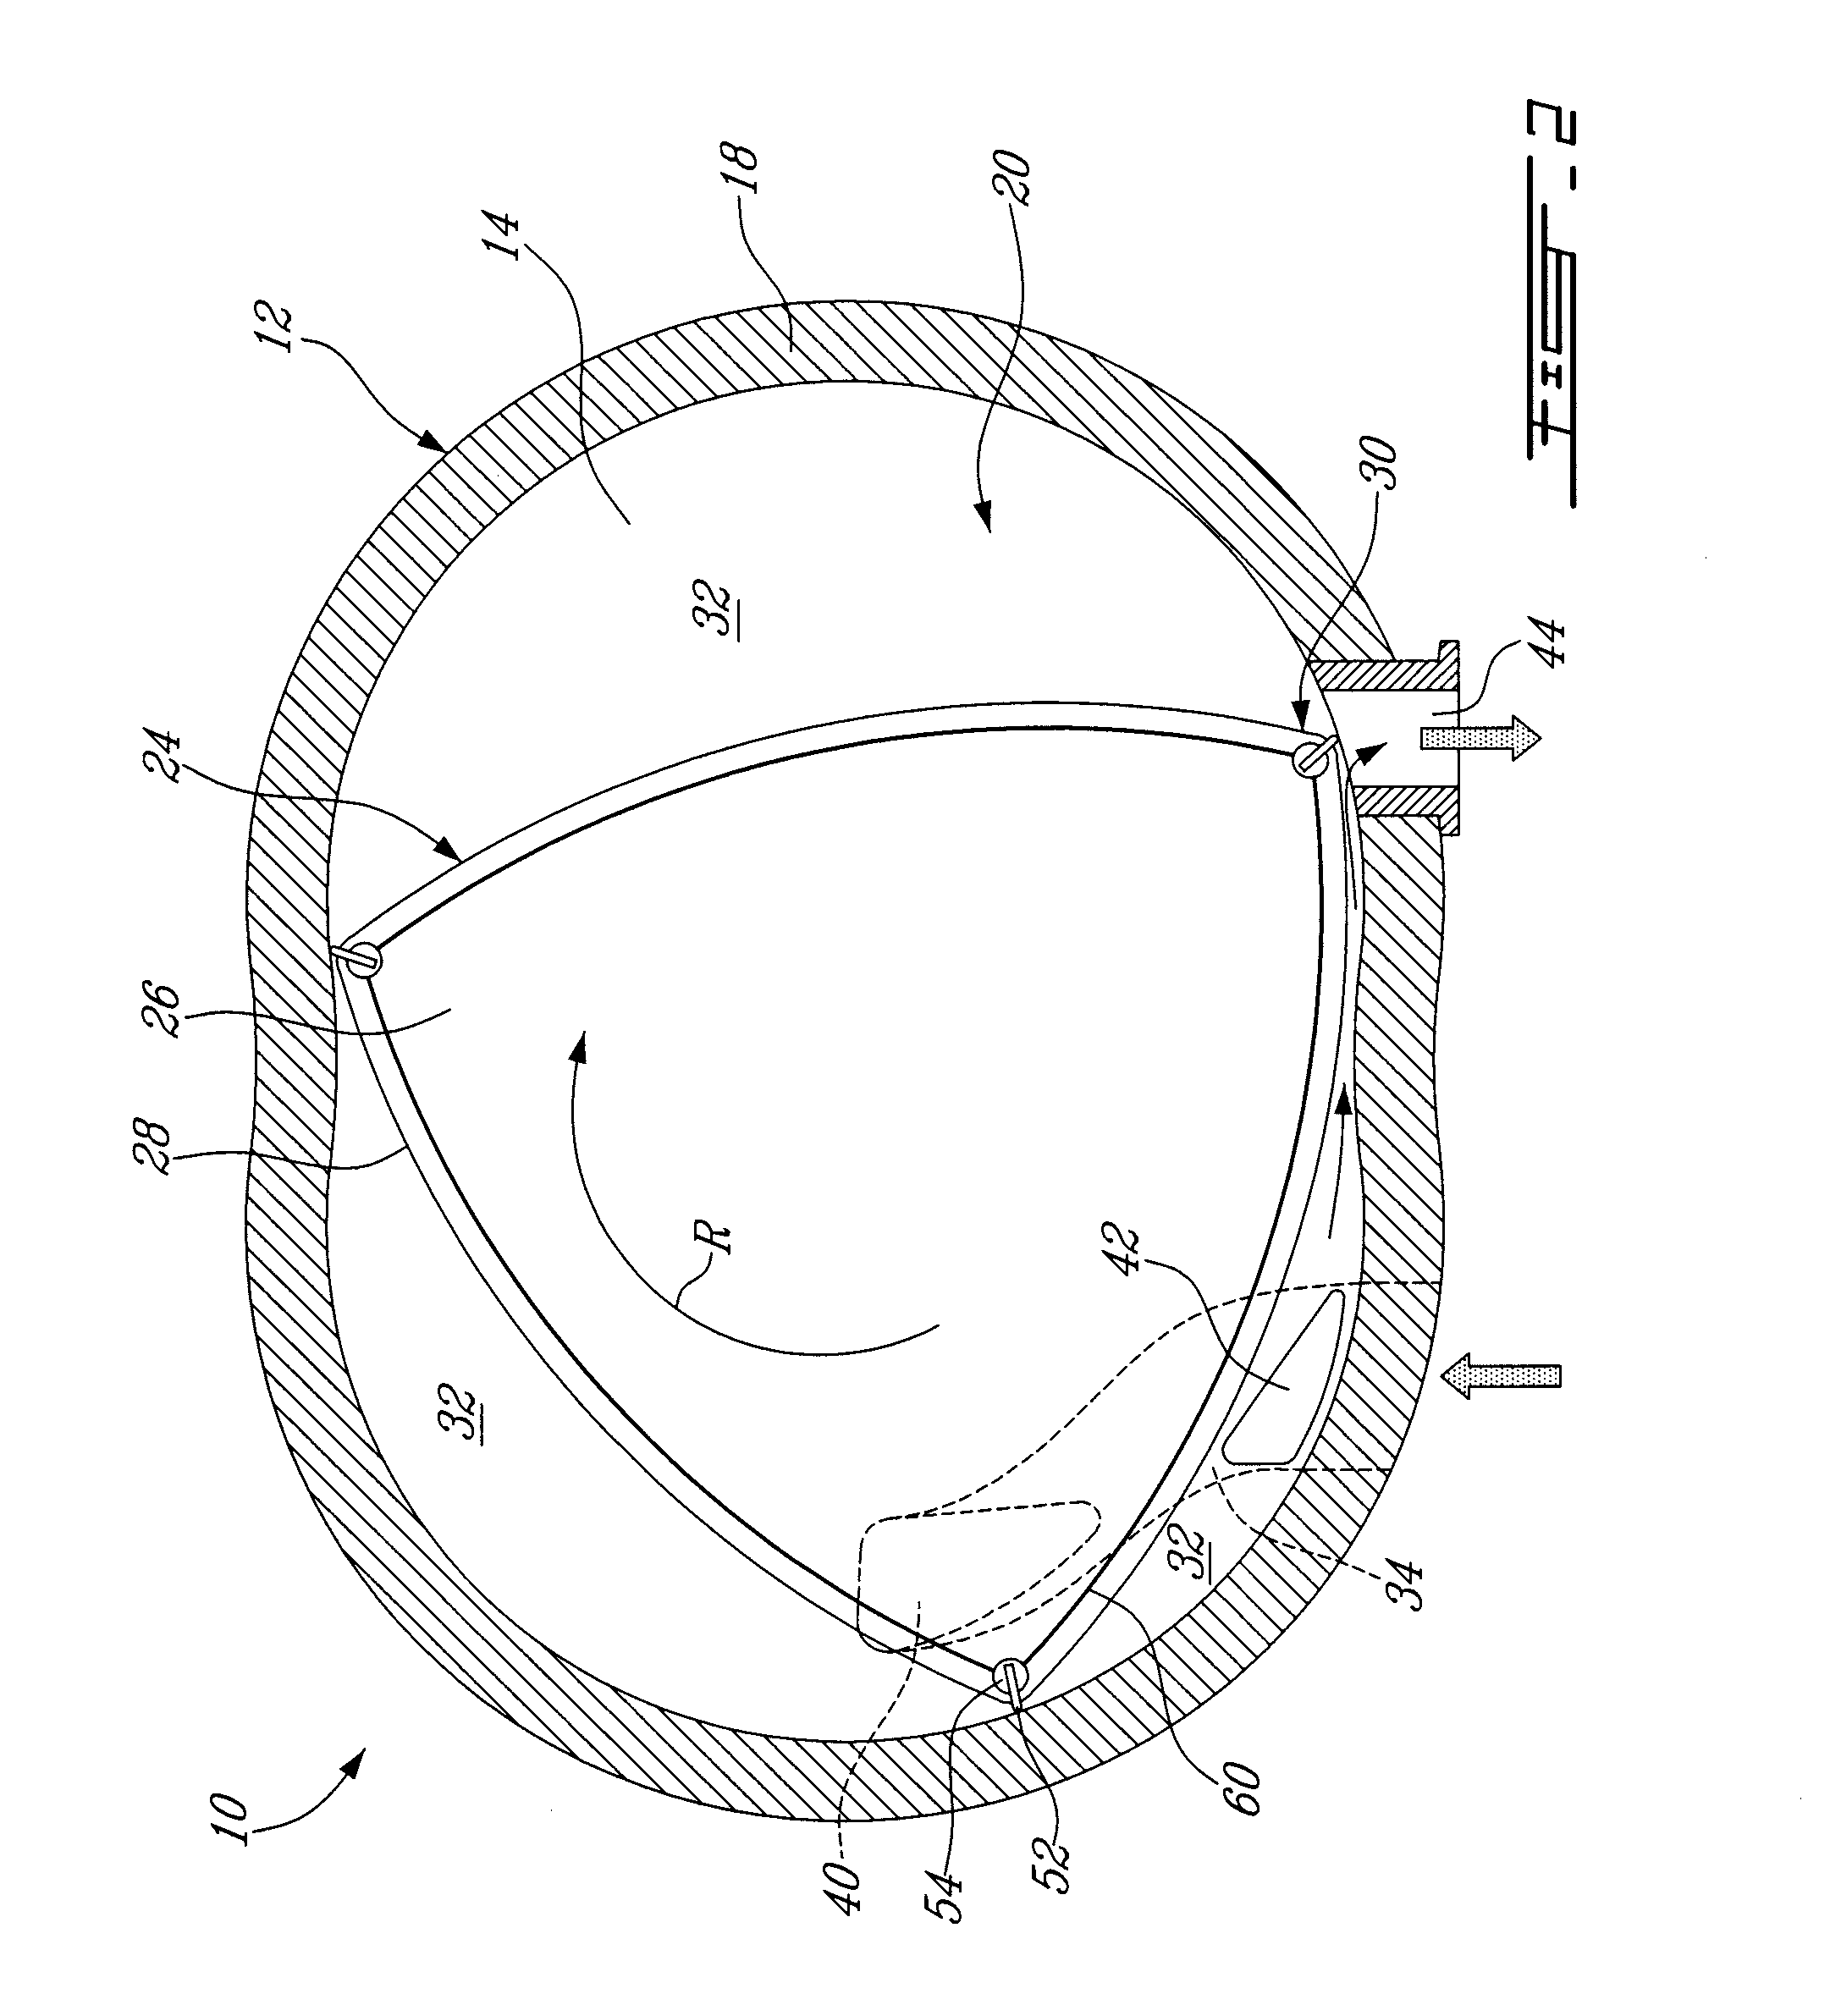 Compound engine system with rotary engine